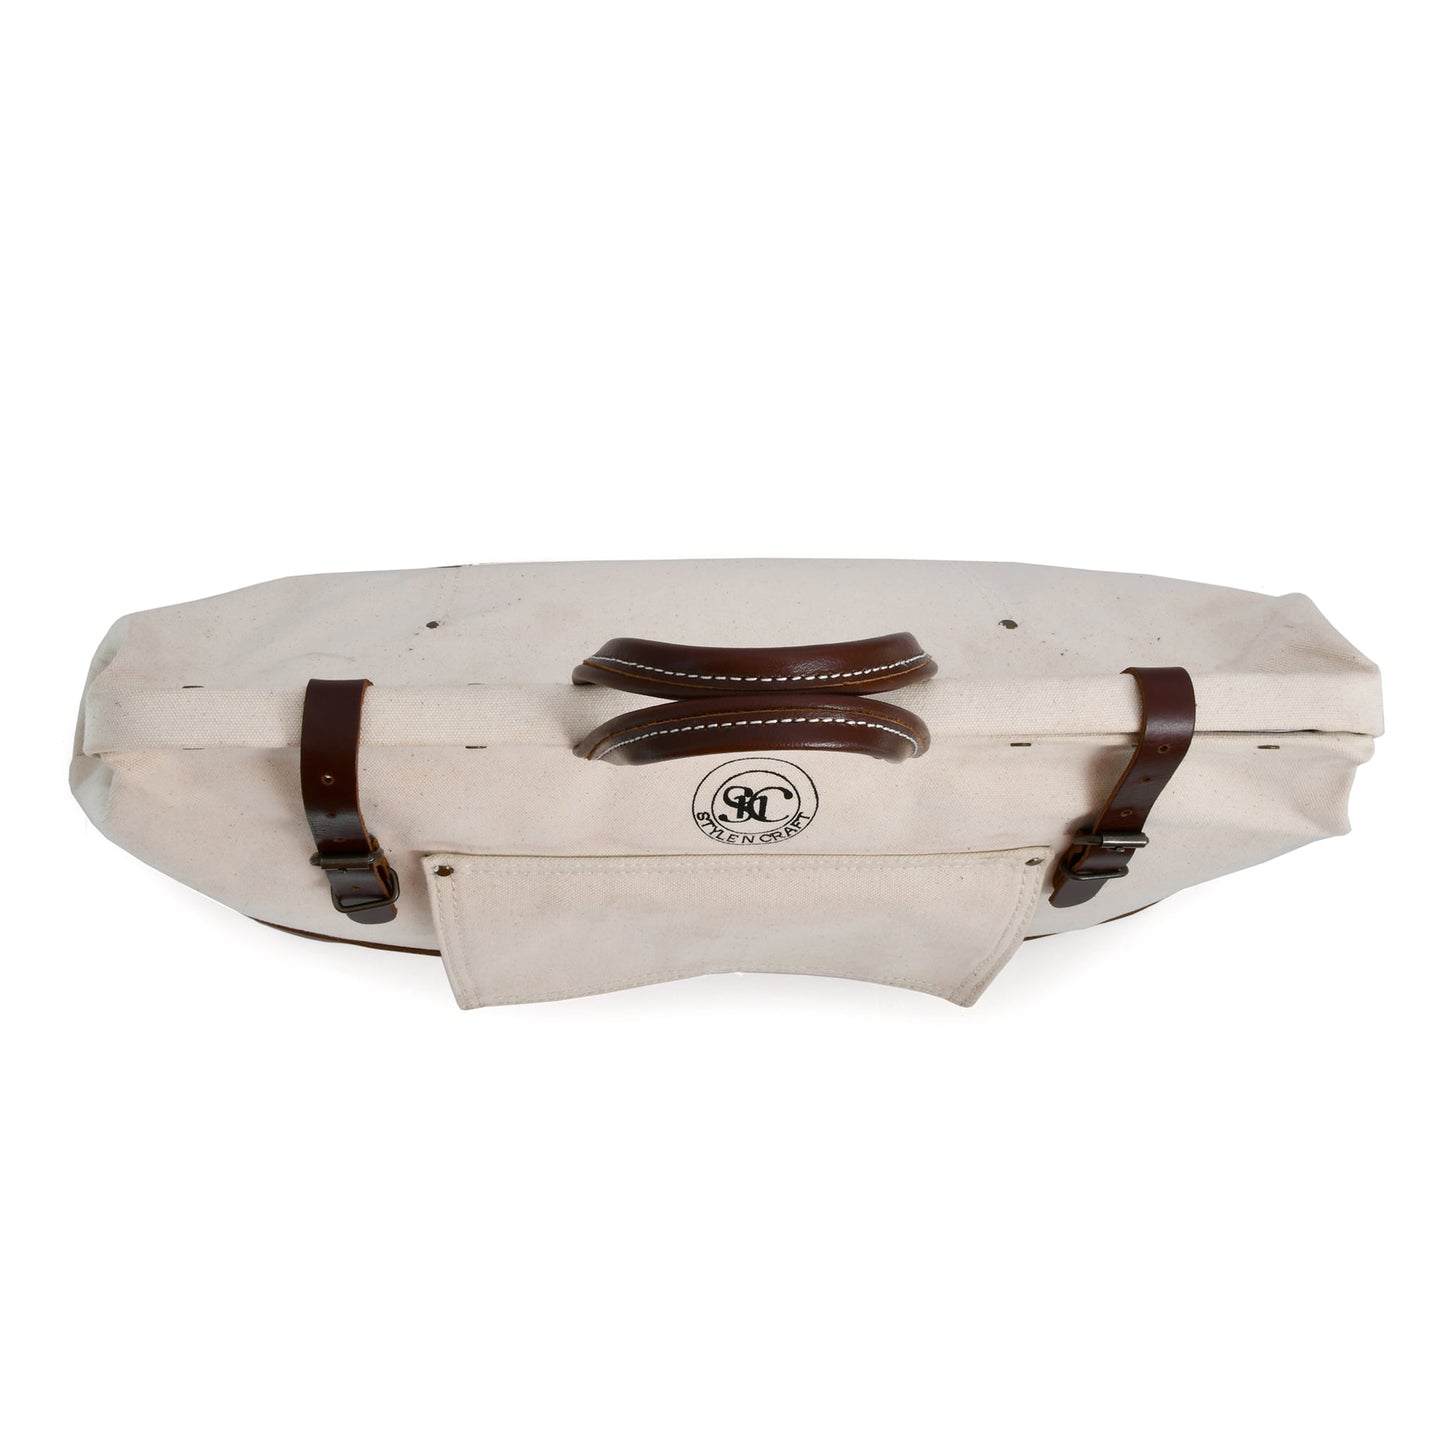 Style n Craft 97517 - 20 Inch Mason's Tool Bag in White Canvas and Dark Tan Full Grain Leather Combination - Top View Showing the Handles & the Leather Closure Straps